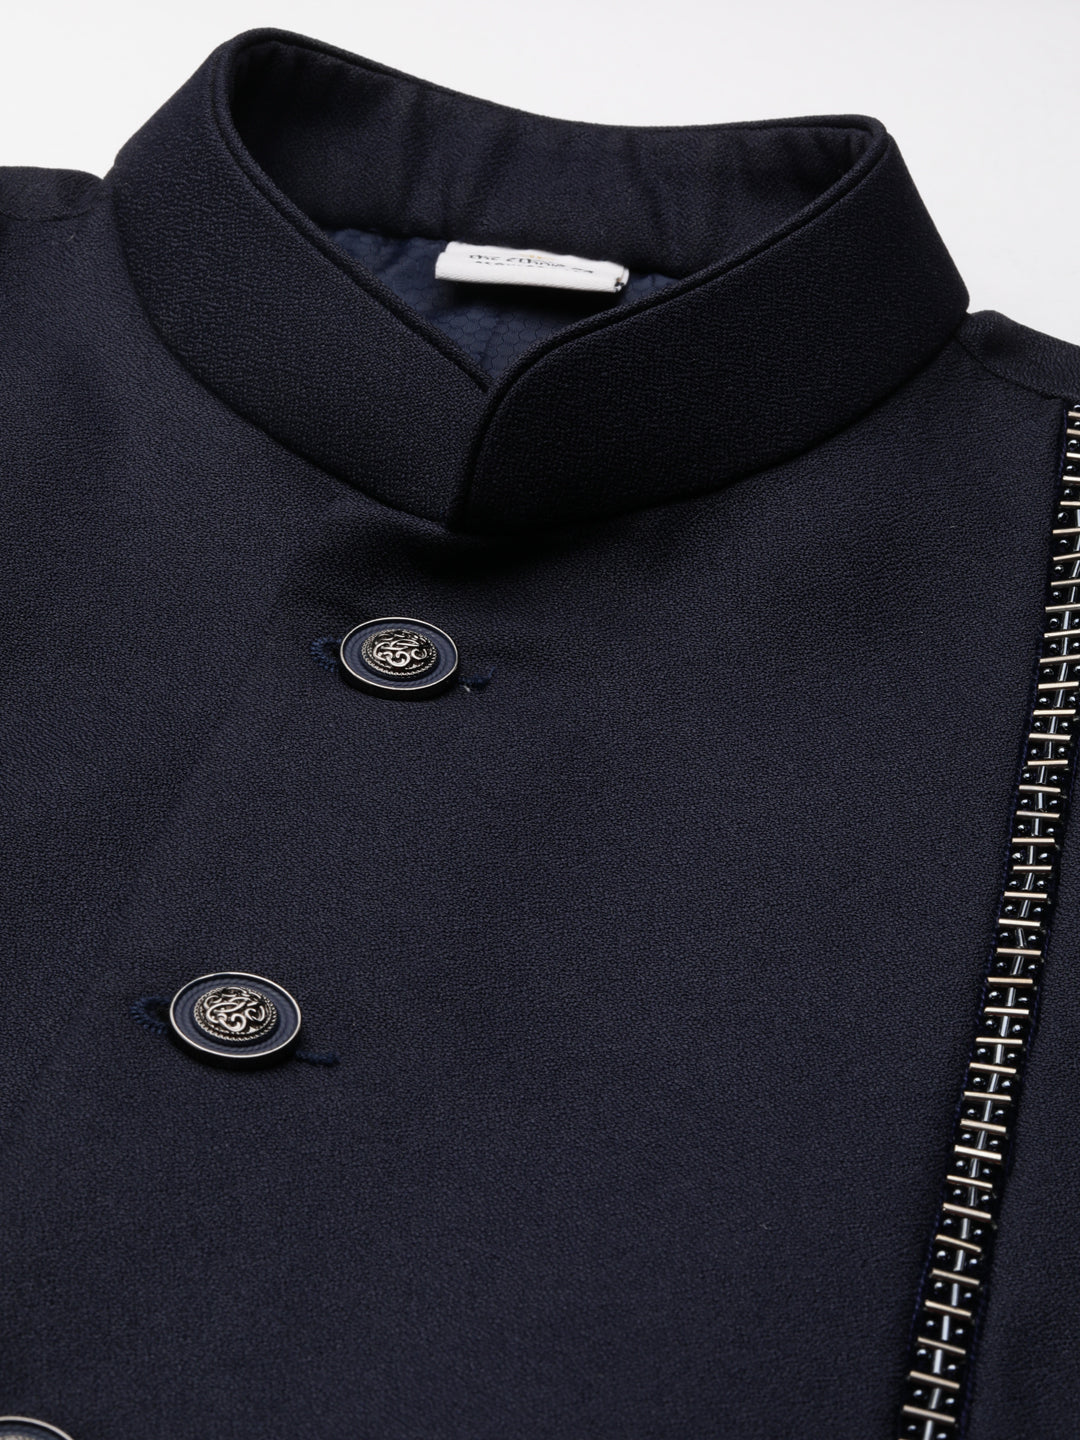 Navy Embroidered Bandhgala with velvet Detailing